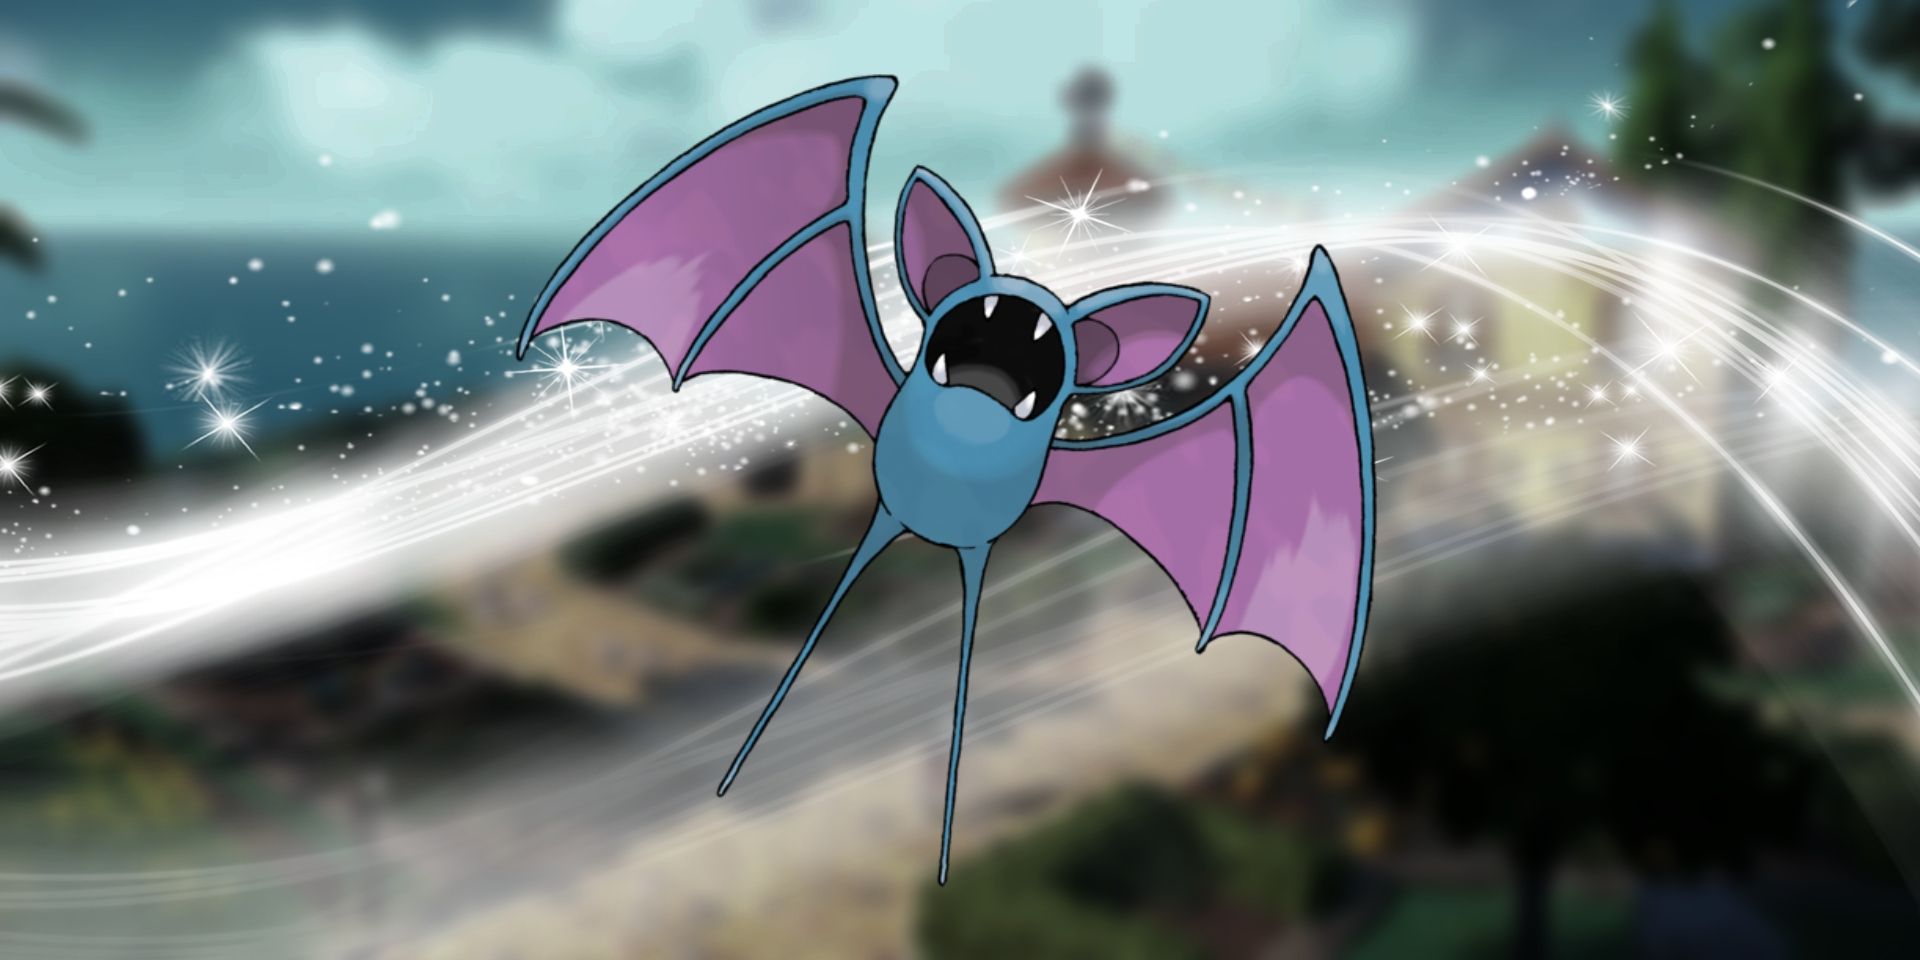 Pokemon's Zubat in the middle. Behind it is a white flowing and sparkling effect.